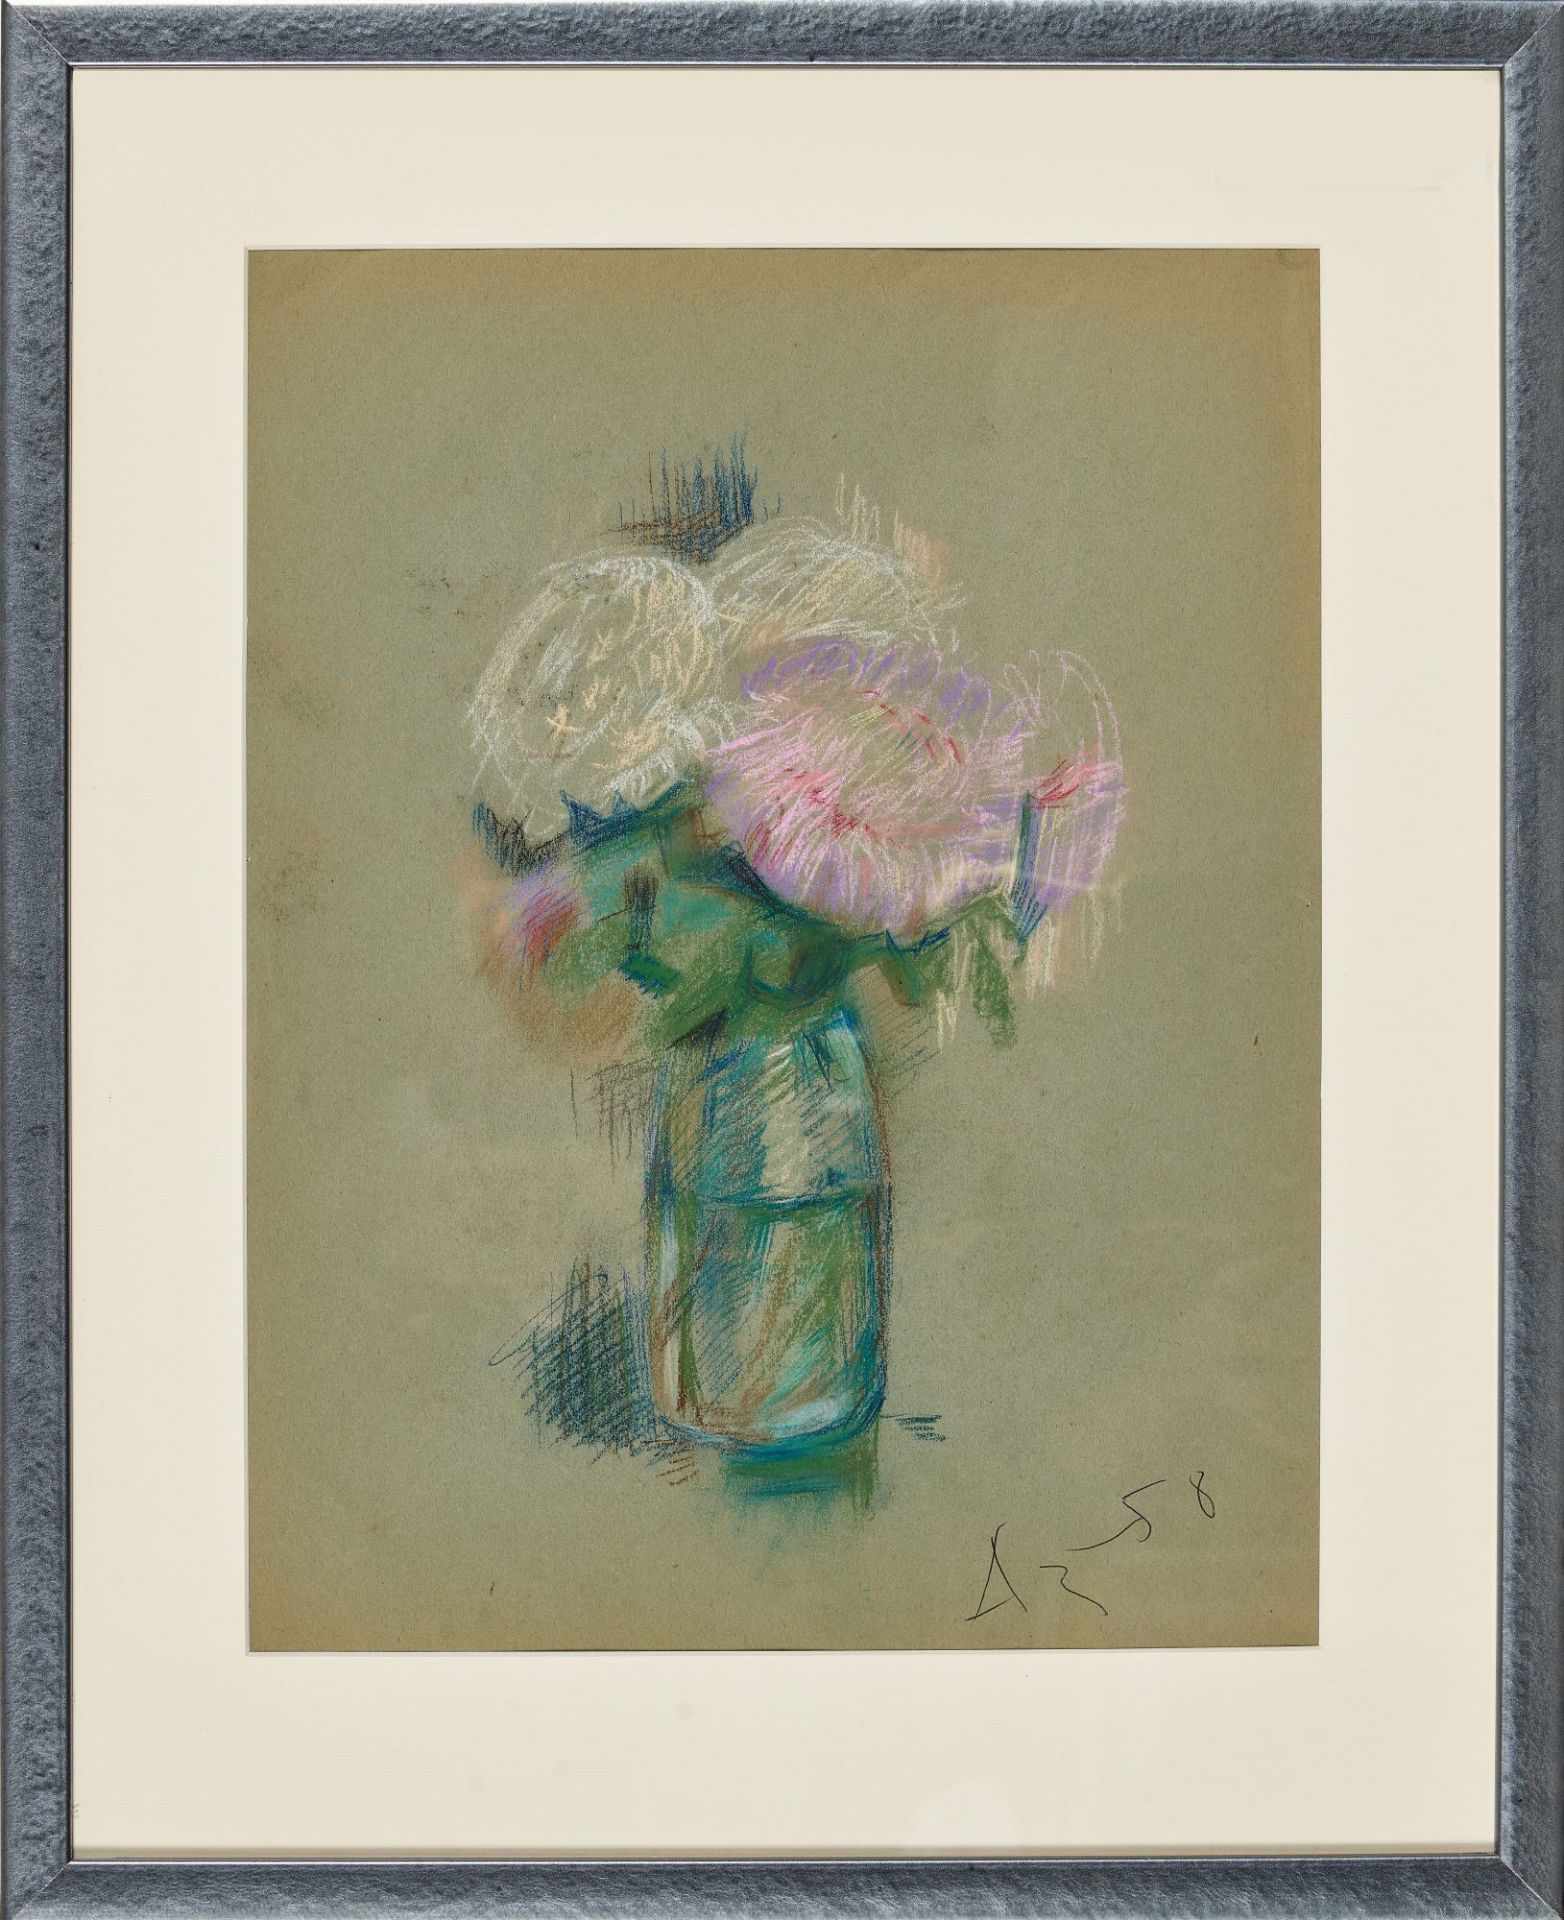 ZVEREV, ANATOLY TIMOFEEVIC: Blumenbouquet. - Image 2 of 2